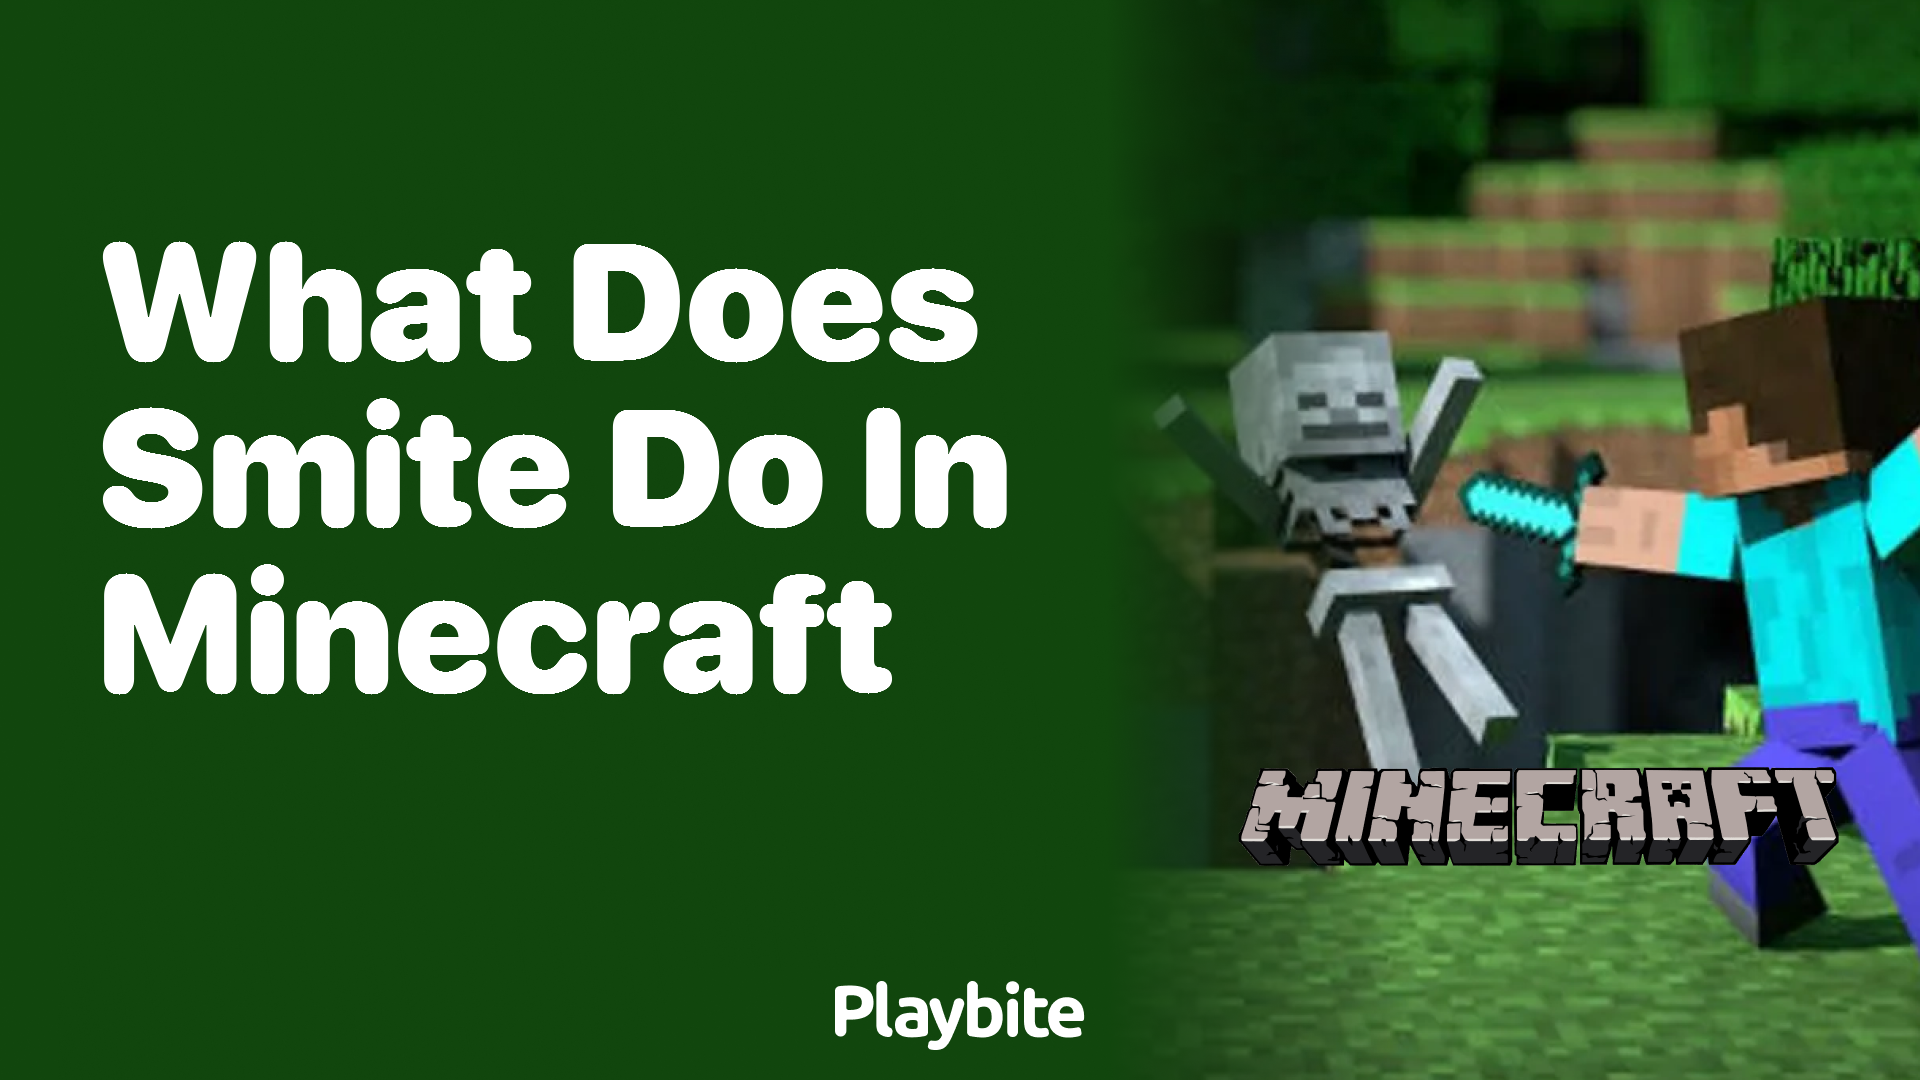 What Smite Does in Minecraft and How to Get It